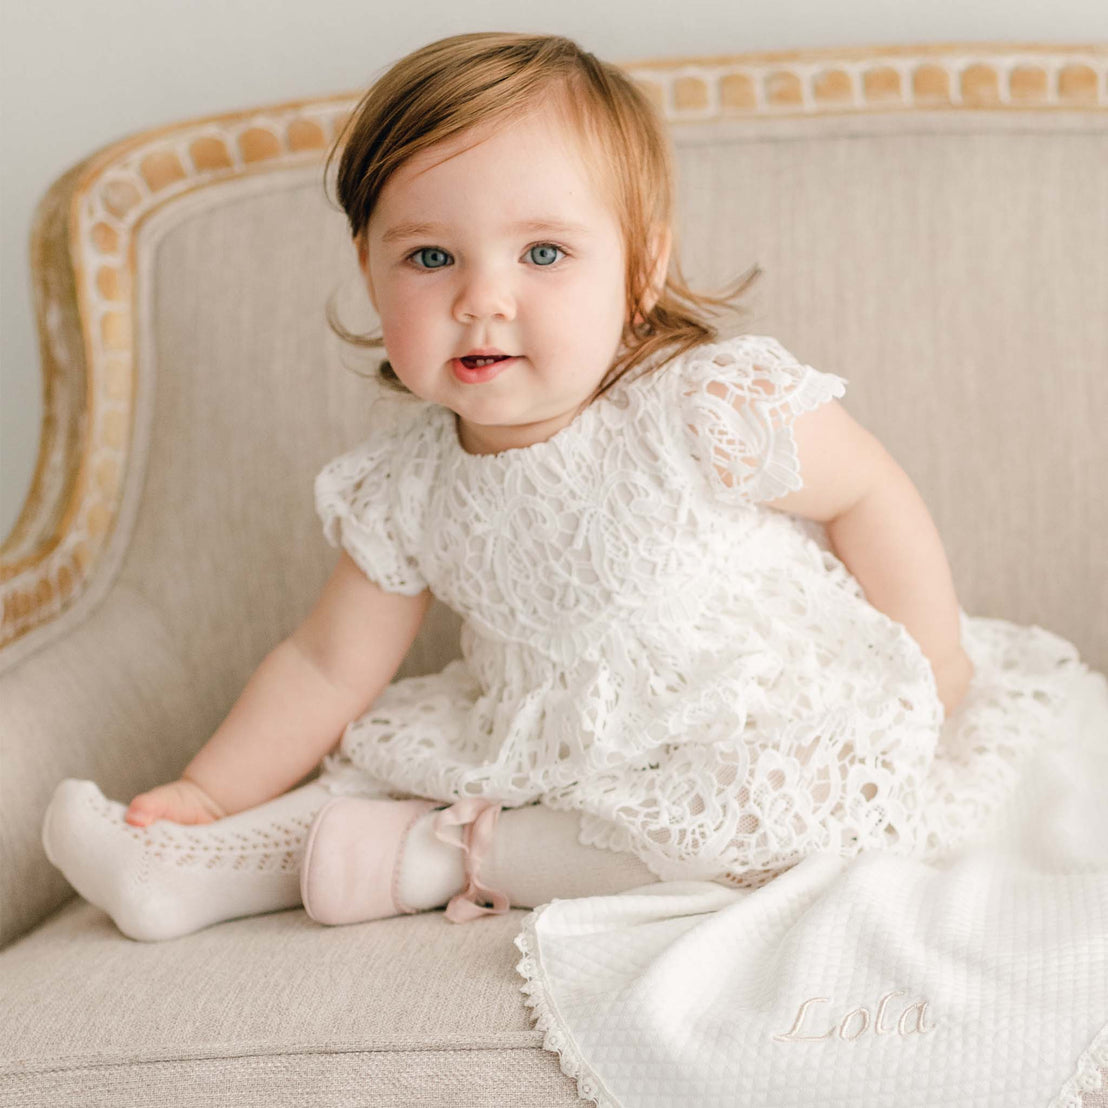 Baby girl sitting on a couch and wearing the Lola Dress. The dress is made with a cotton lining in light ivory featuring an all-over lace overlay.